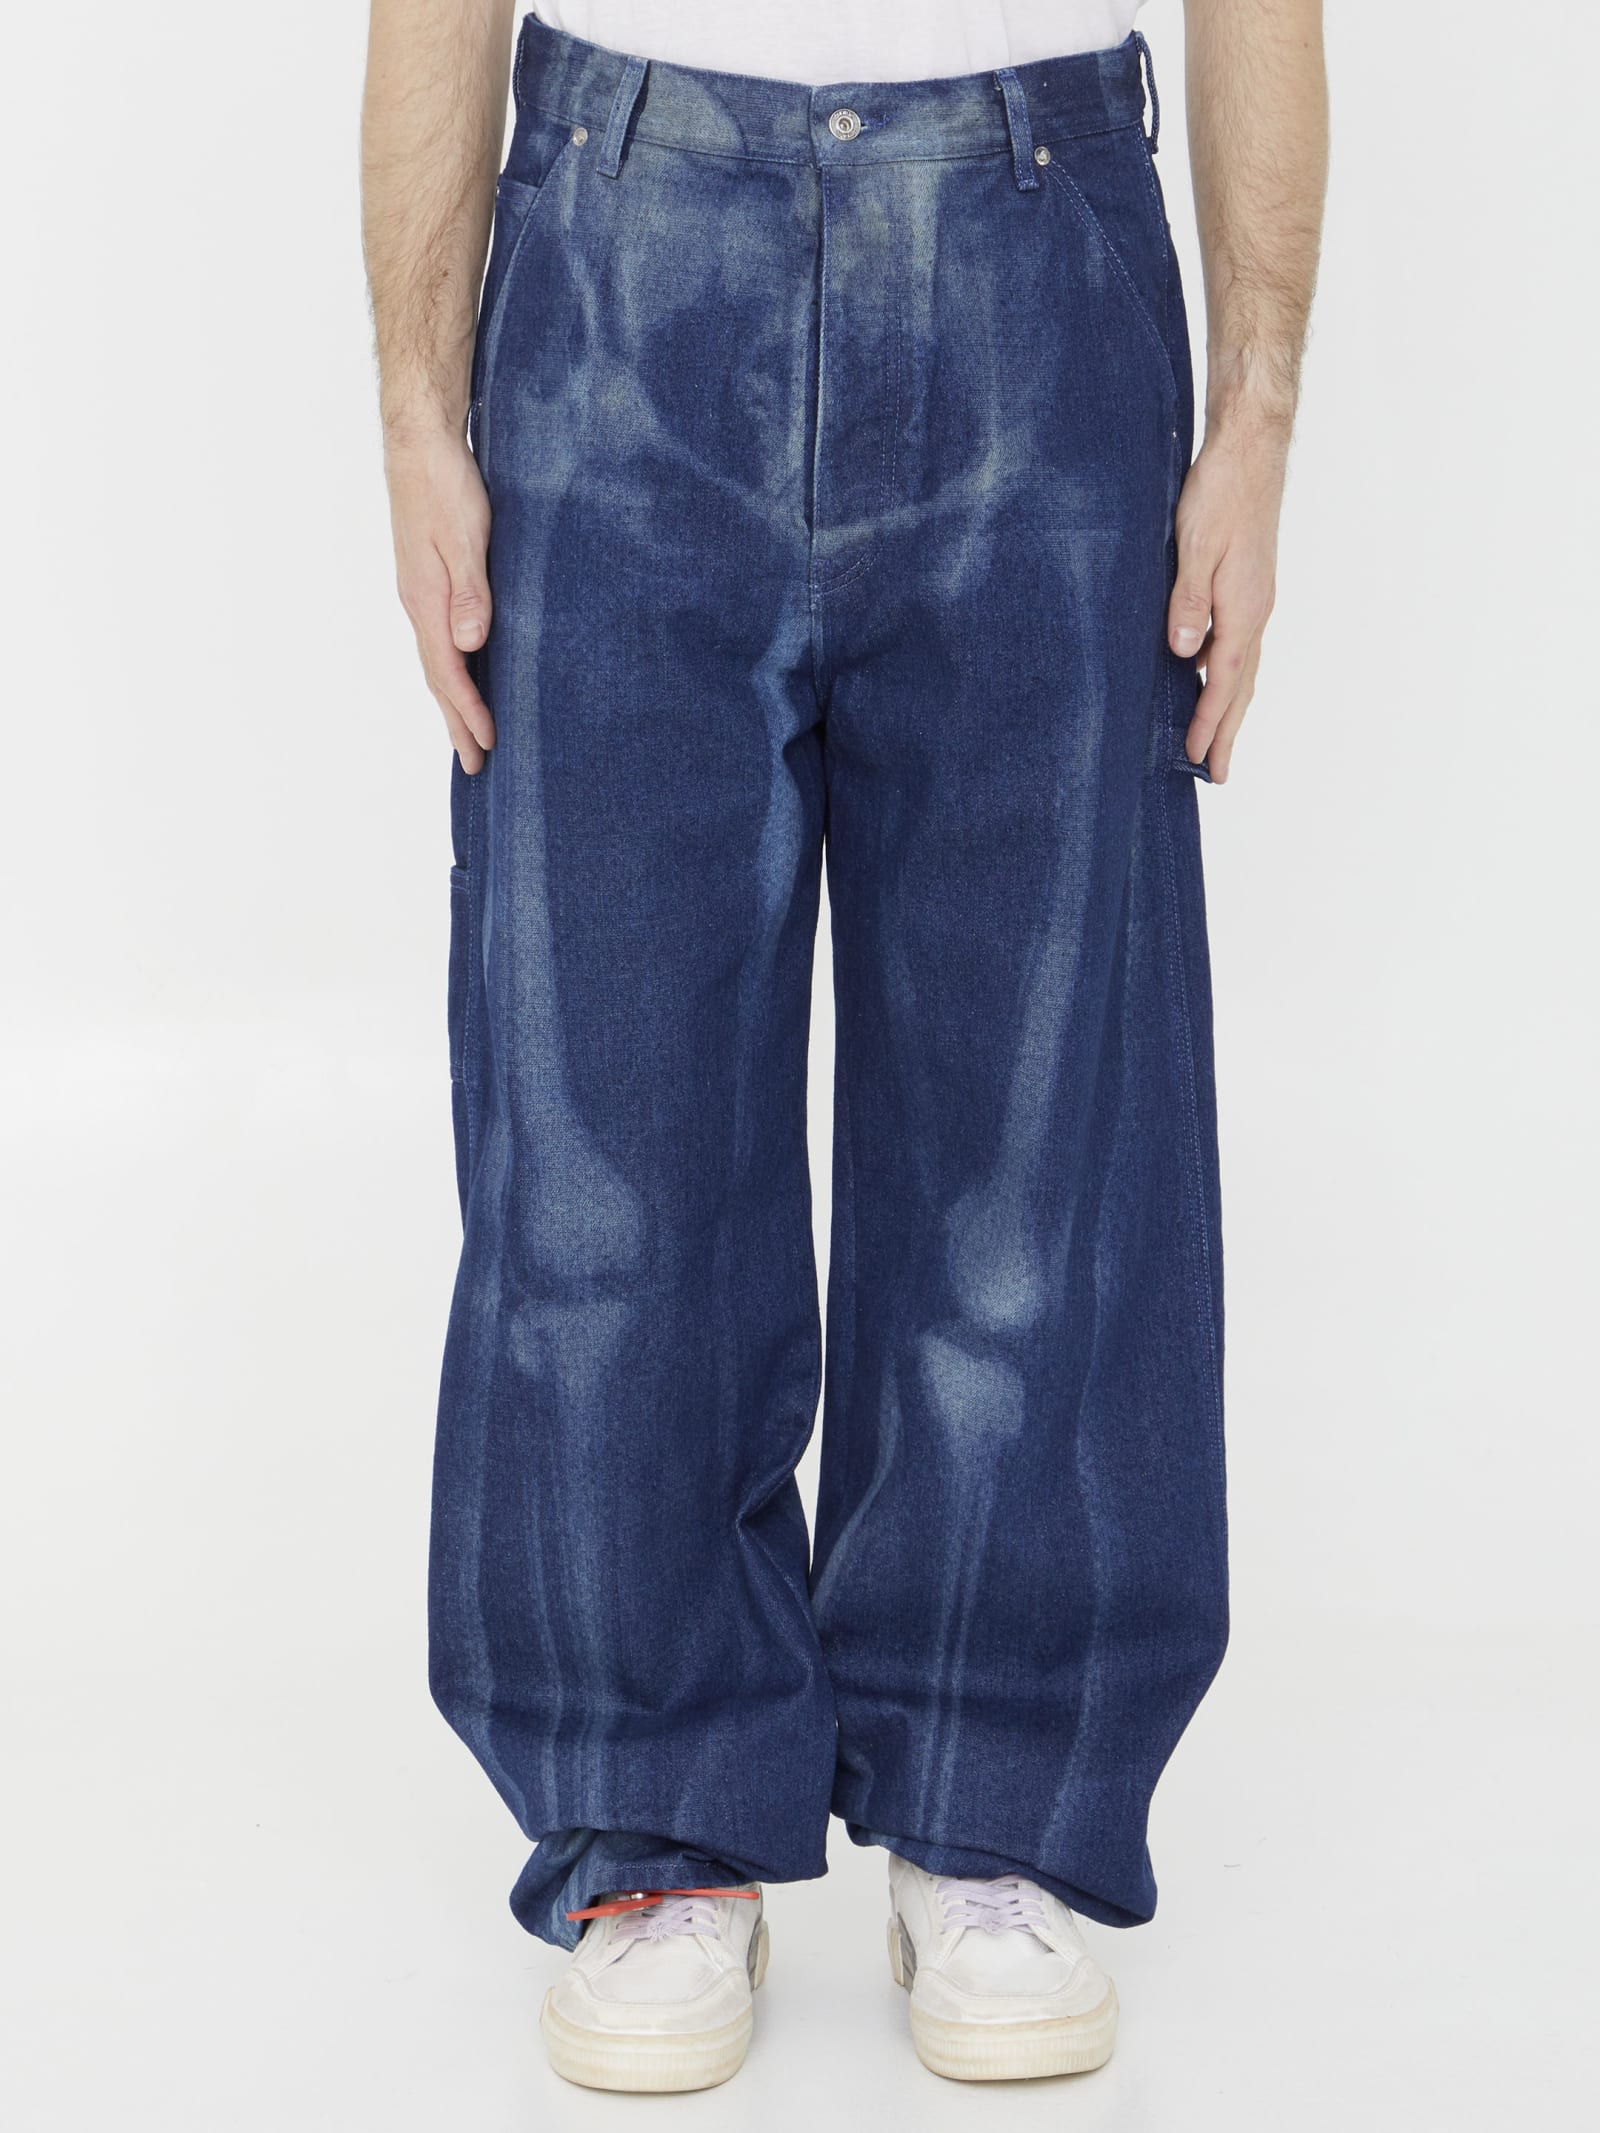 OFF-WHITE BODY SCAN OVERSIZED JEANS